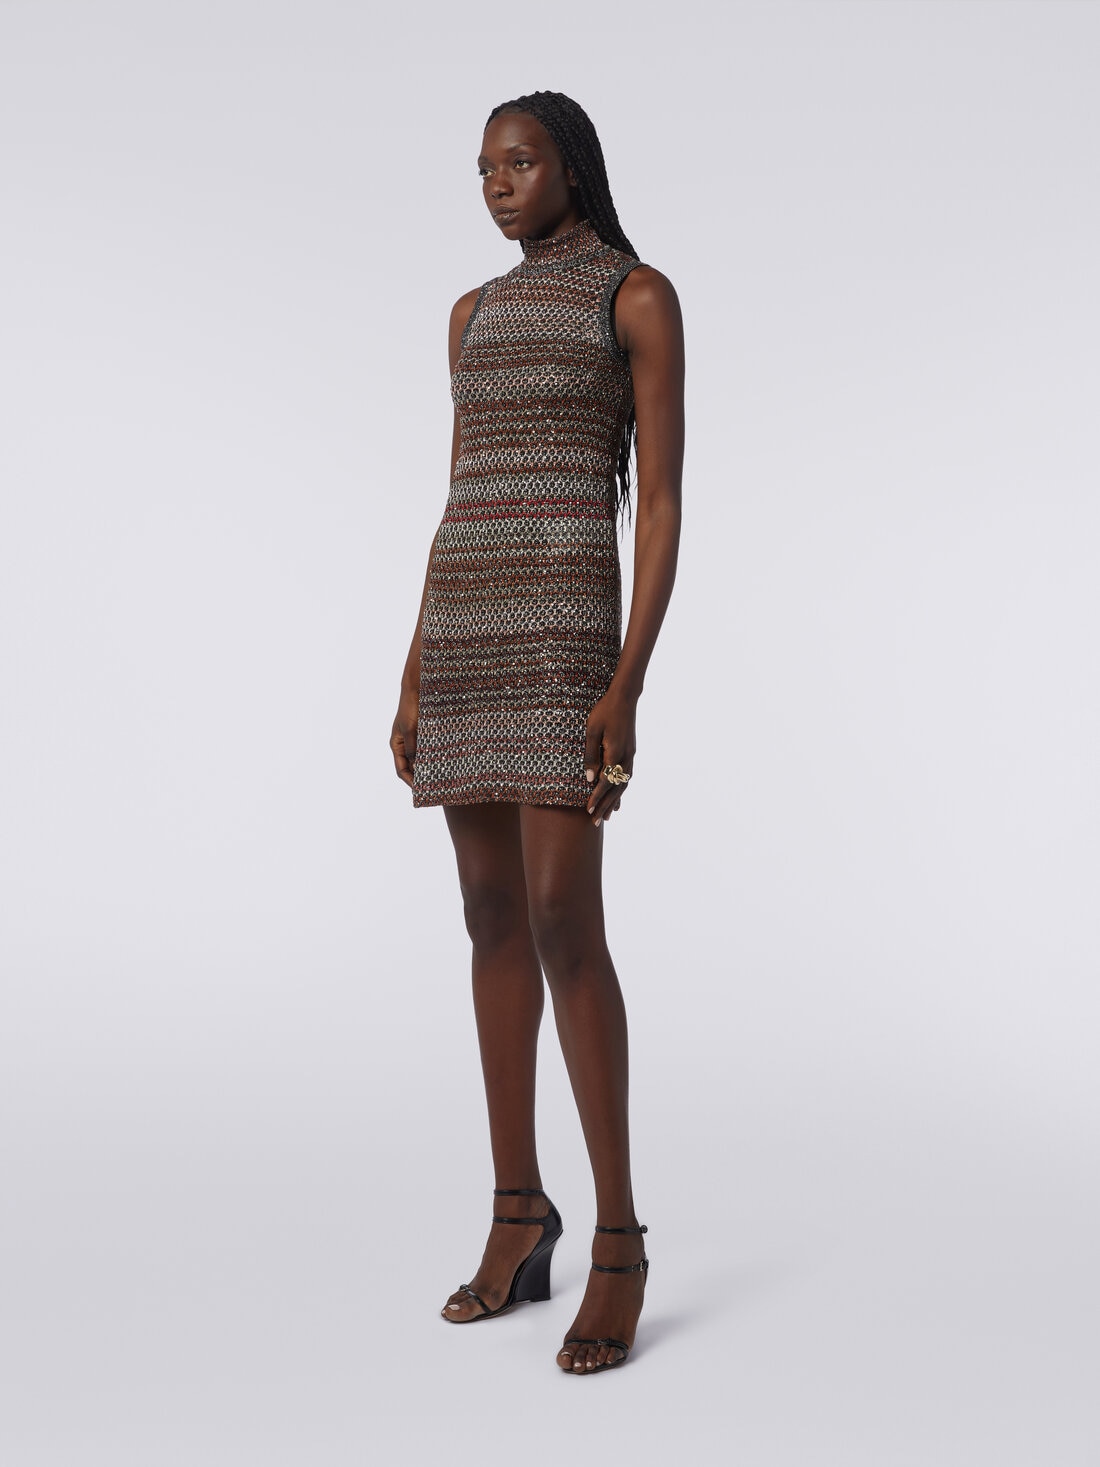 Minidress in mesh knit with high neck and sequin appliqué, Multicoloured  - DS24SG15BK033PSM9AJ - 2